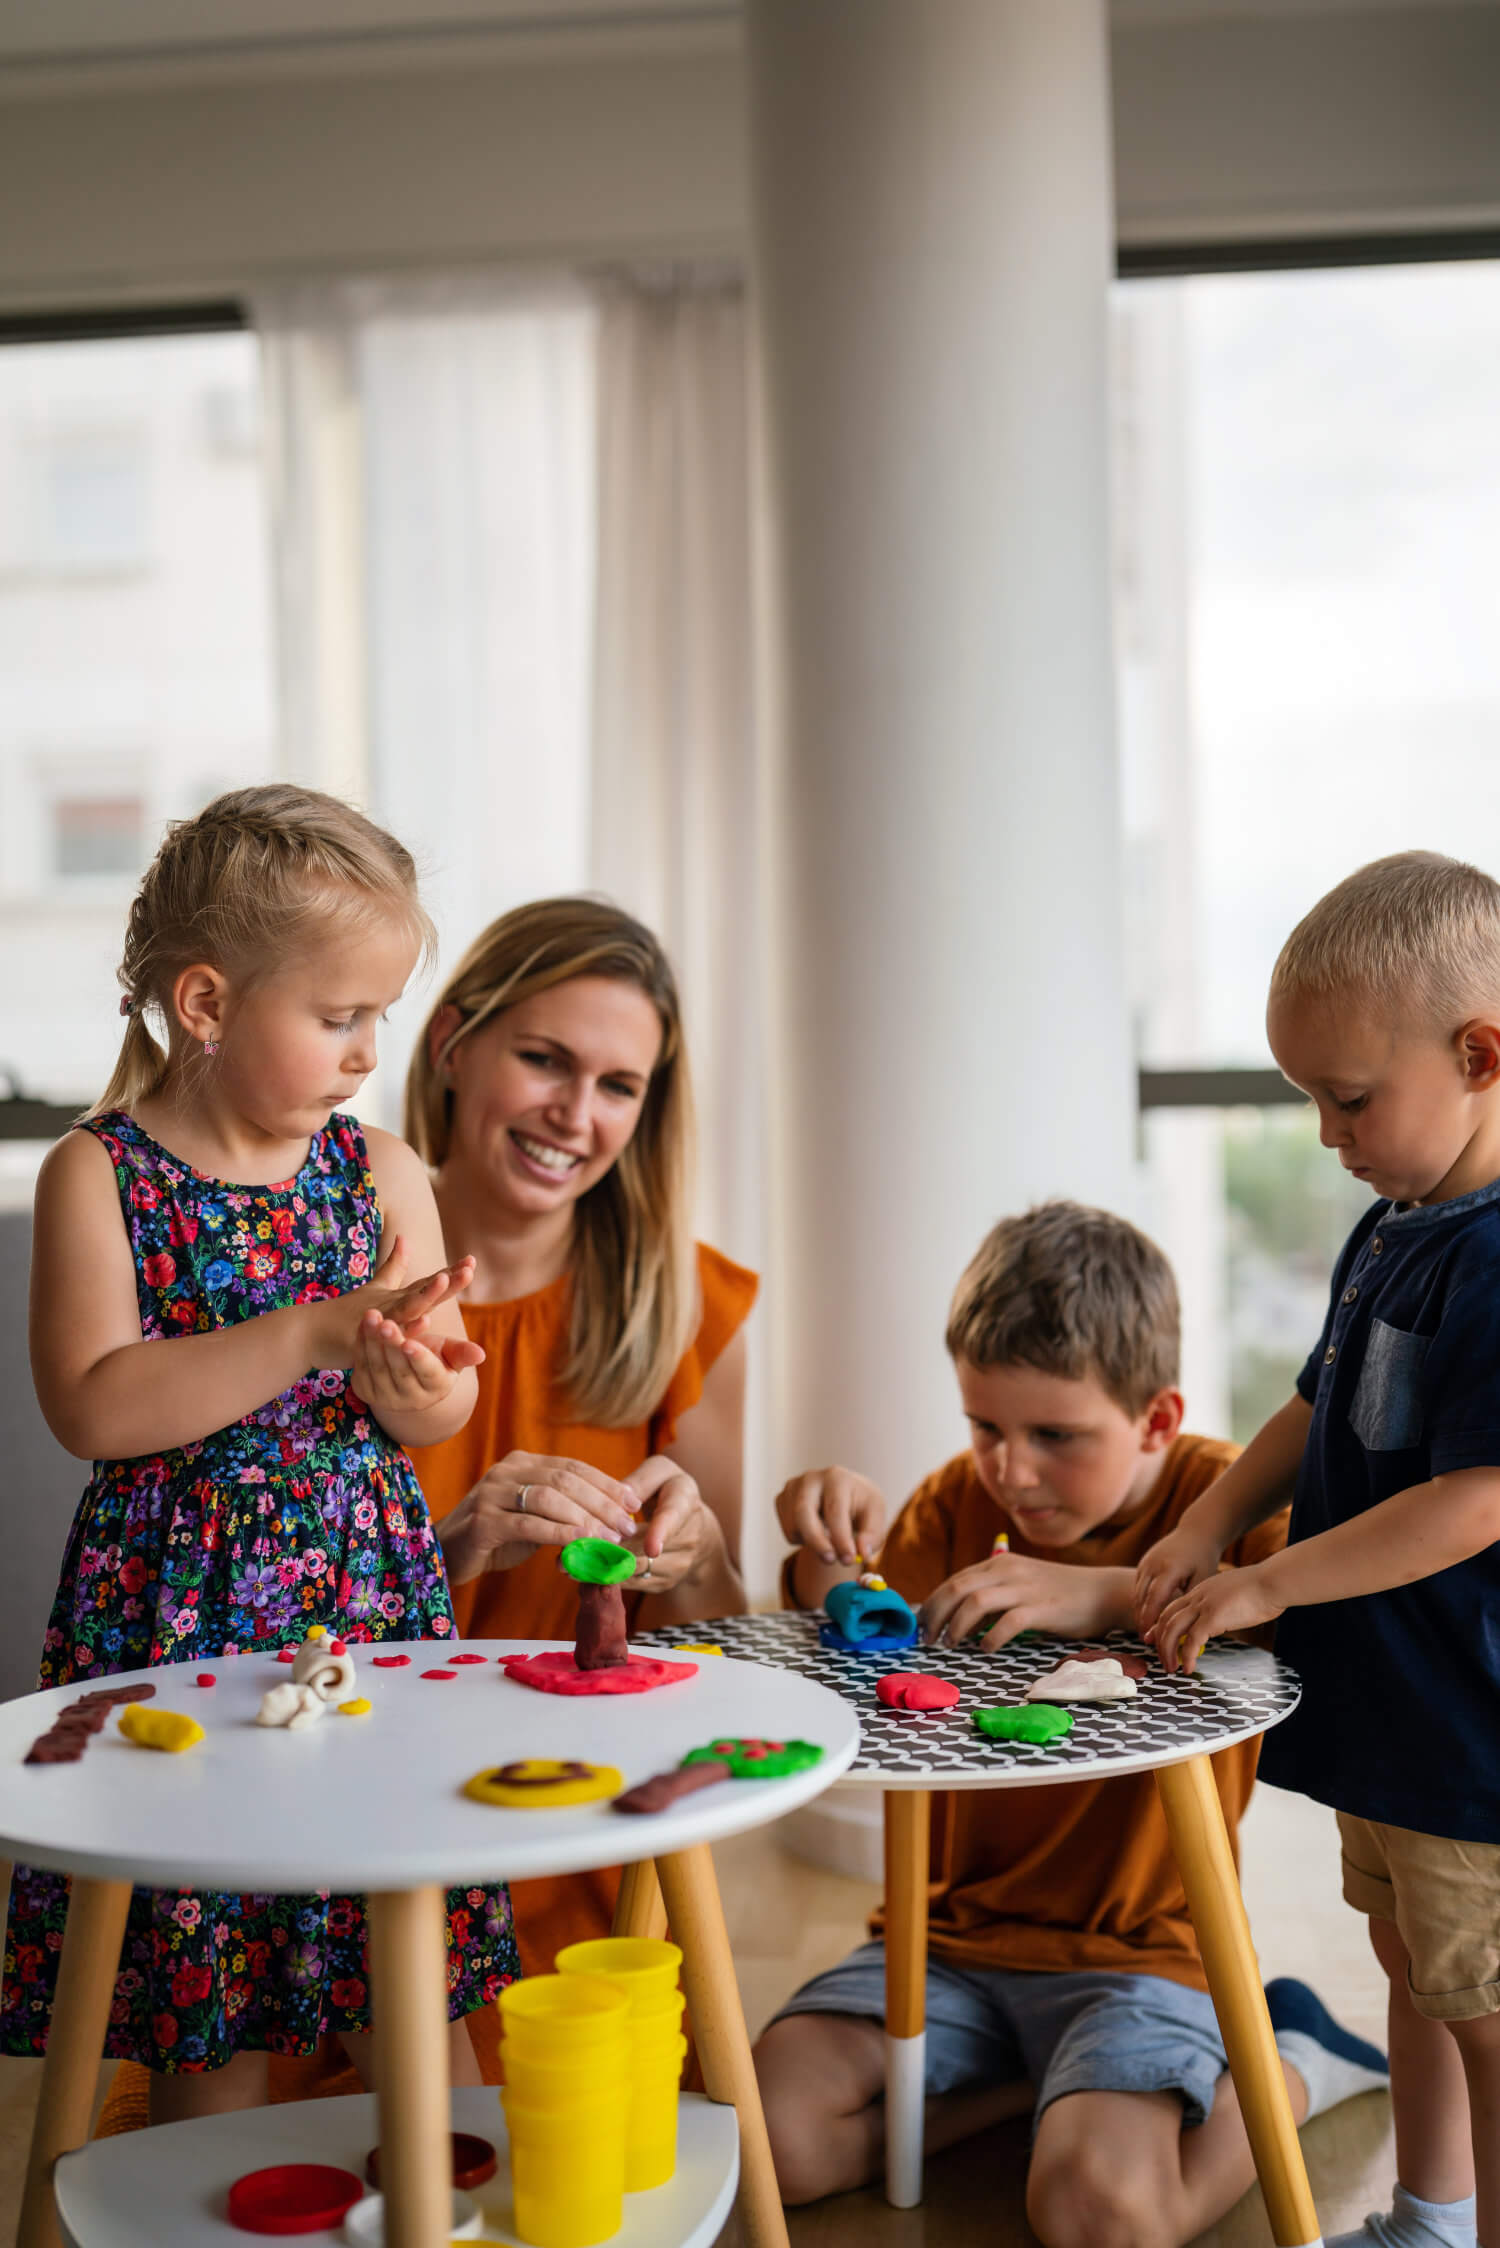 A woman and three children are sitting and standing around a small table, playing with colorful modeling clay in a bright room.